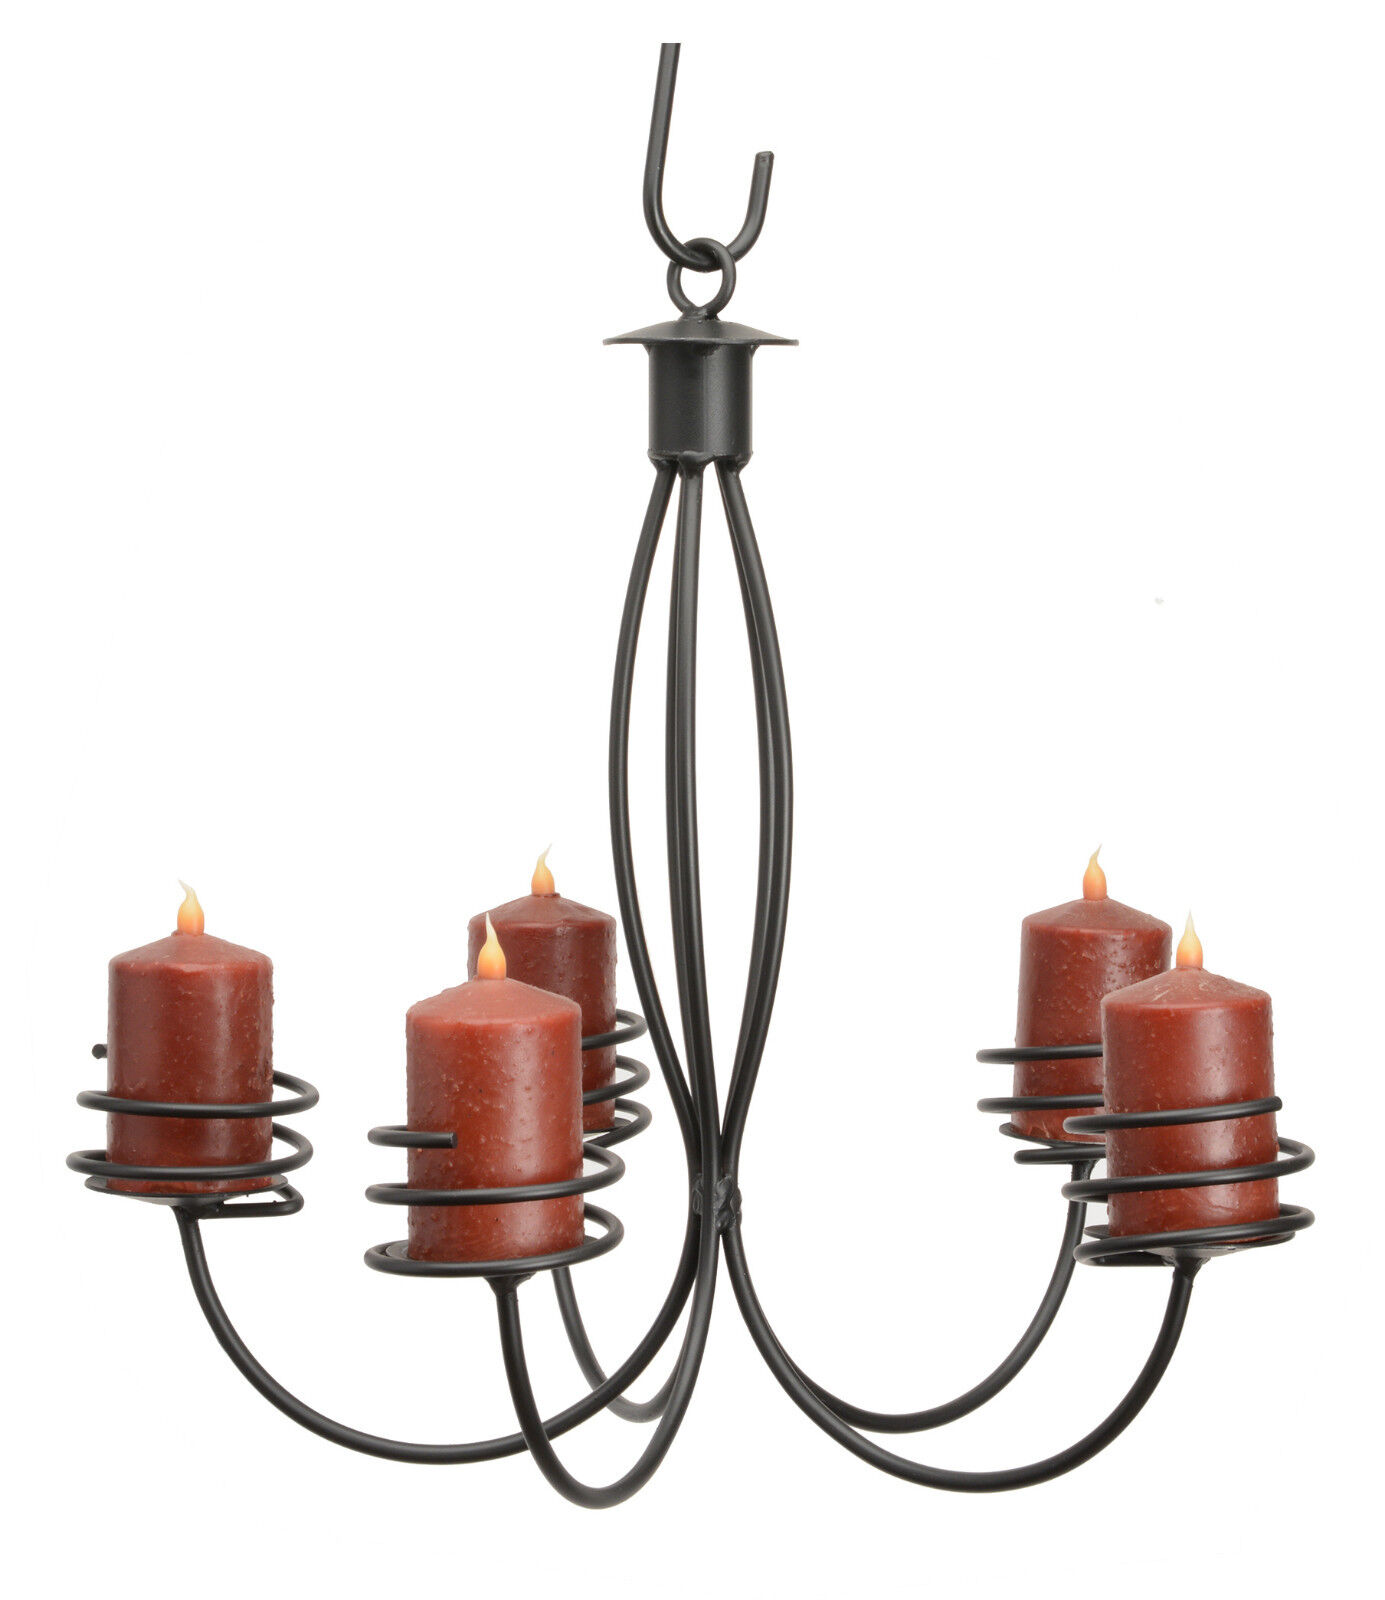 5 ARM WROUGHT IRON PILLAR CANDLE CHANDELIER Amish Handmade Colonial Candelabra